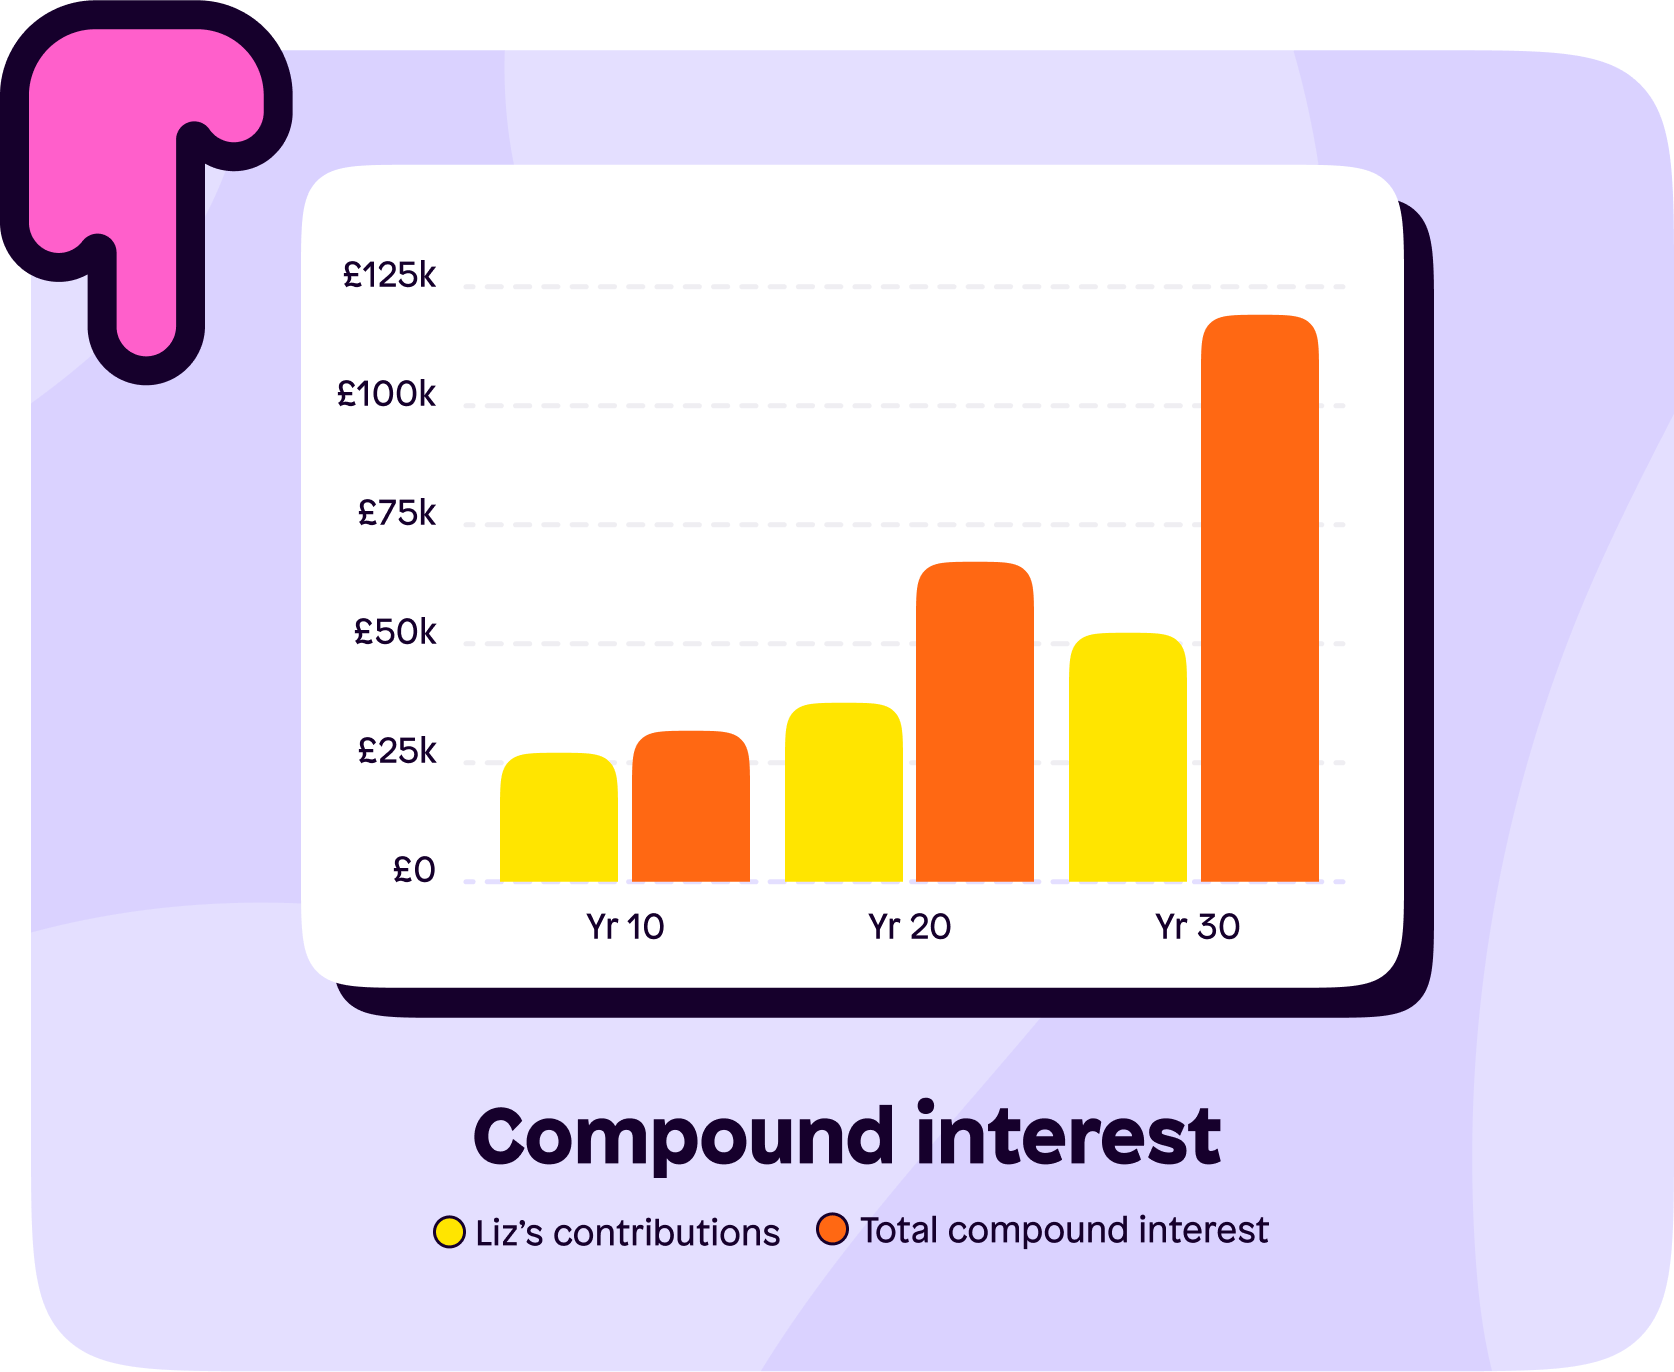 Compound interest - Liz's contributions vs her how much she's generated via compound interest